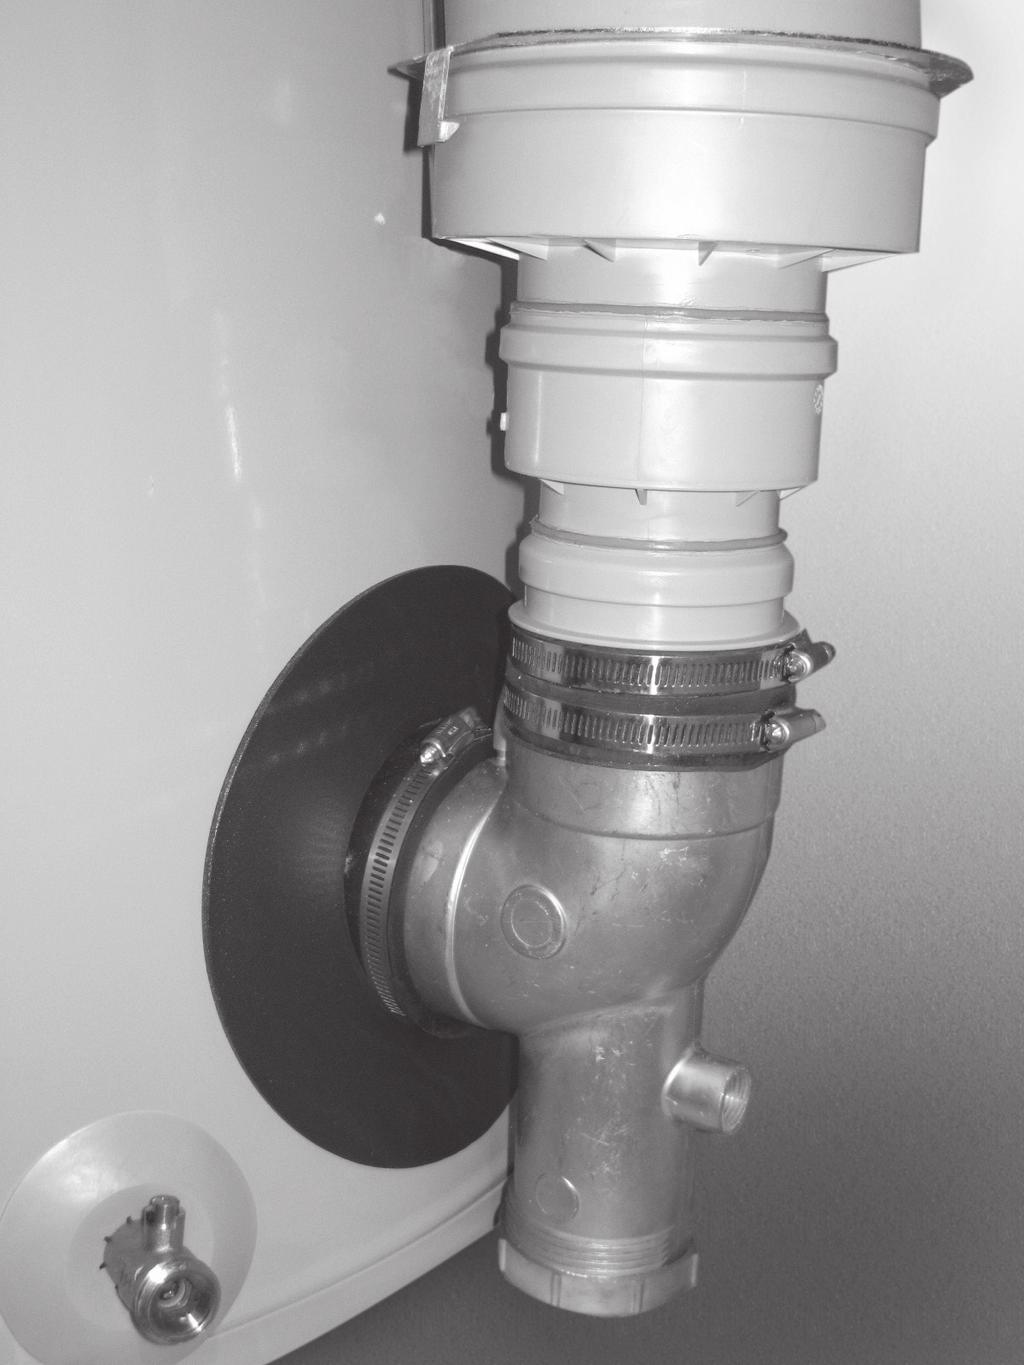 The general instructions for penetrating the side wall are found in the Side Wall Terminations sections of the water heater s Instruction Manual.